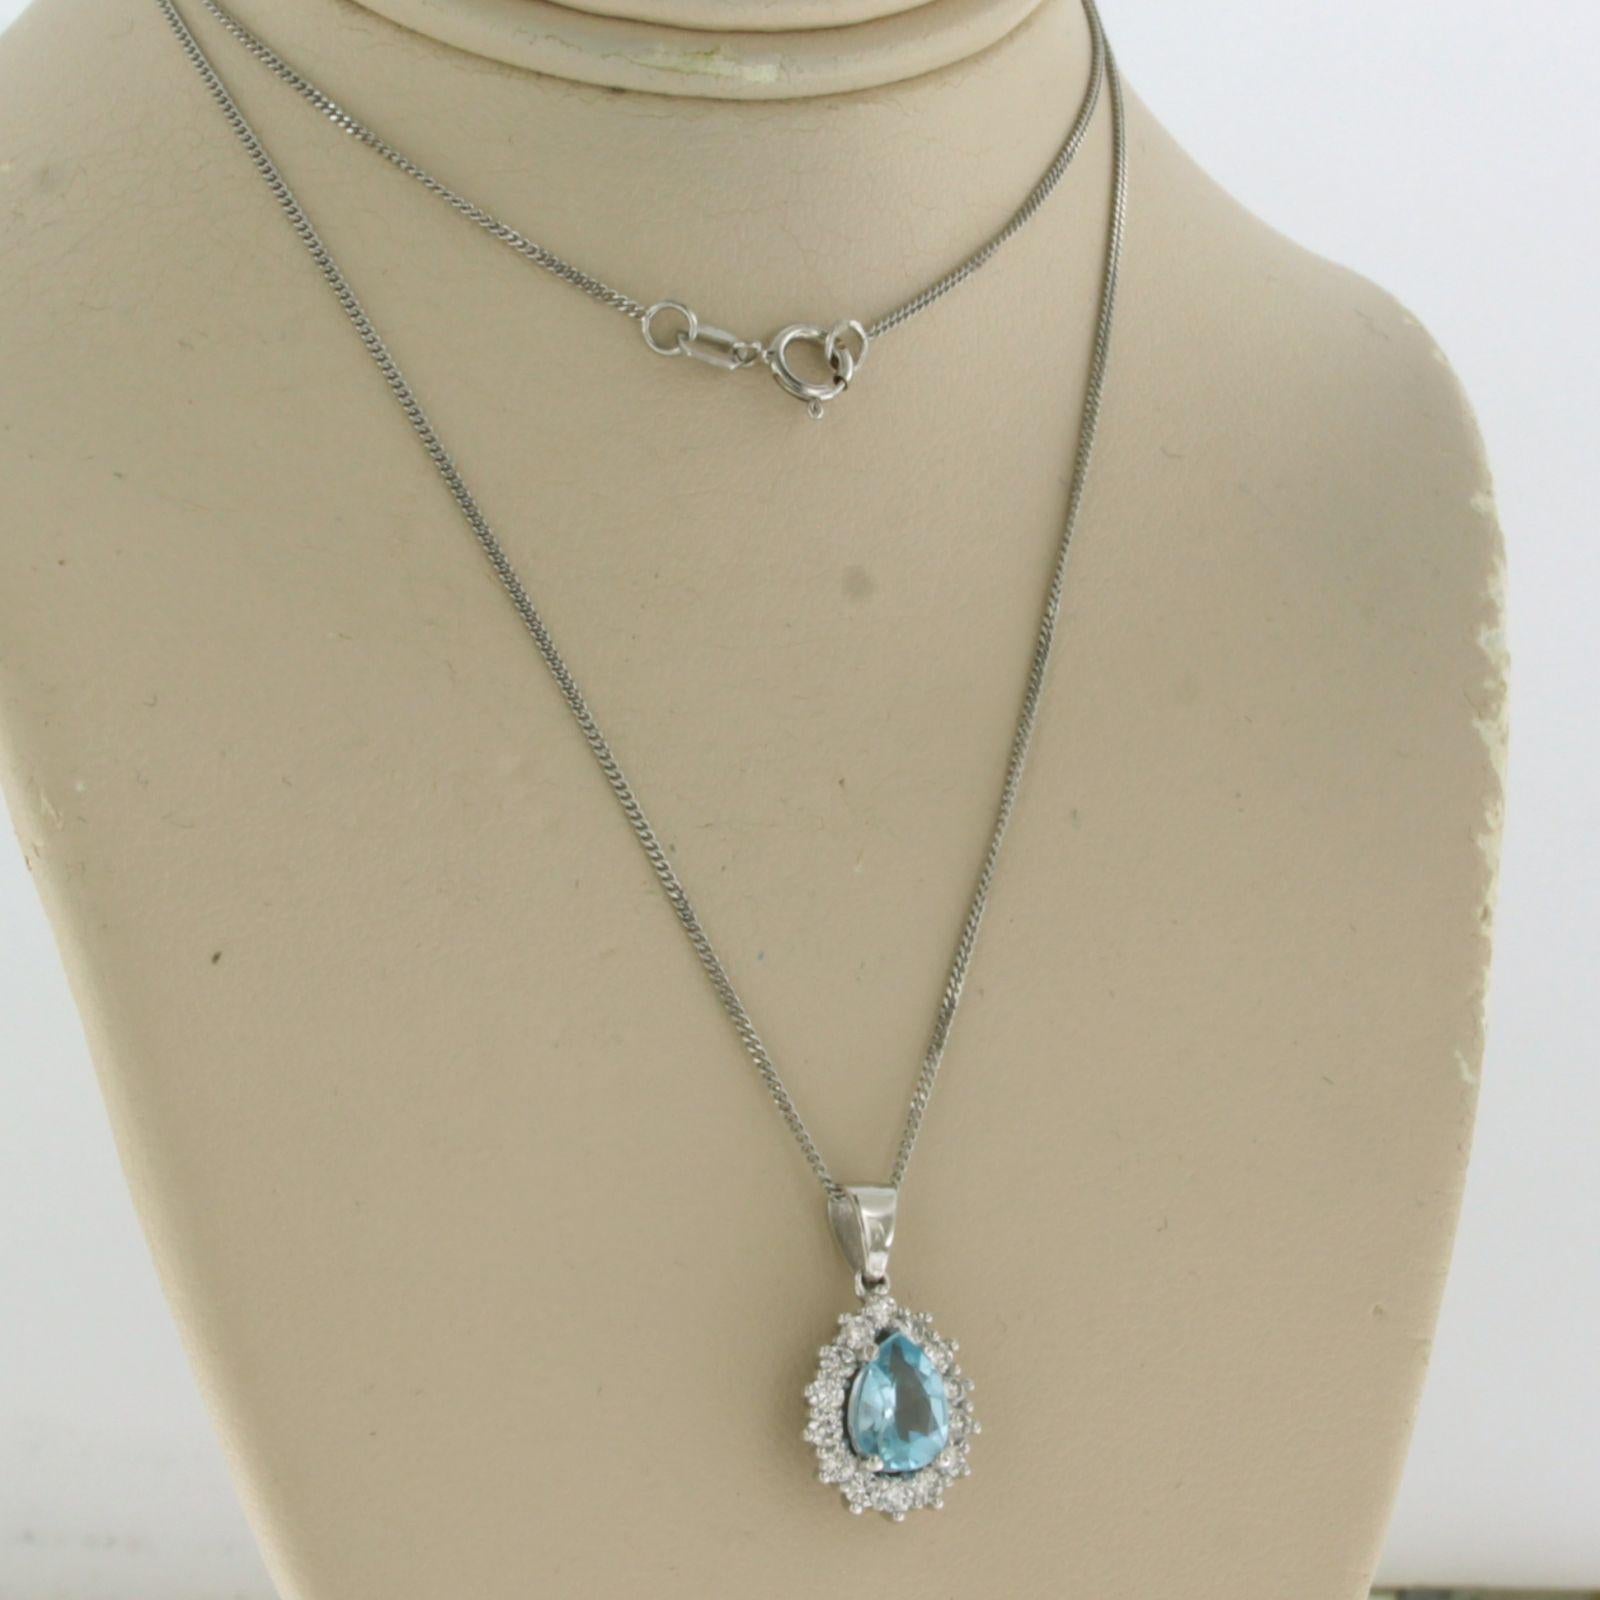 Women's Necklace and pendant set with topaz and diamonds 14k white gold